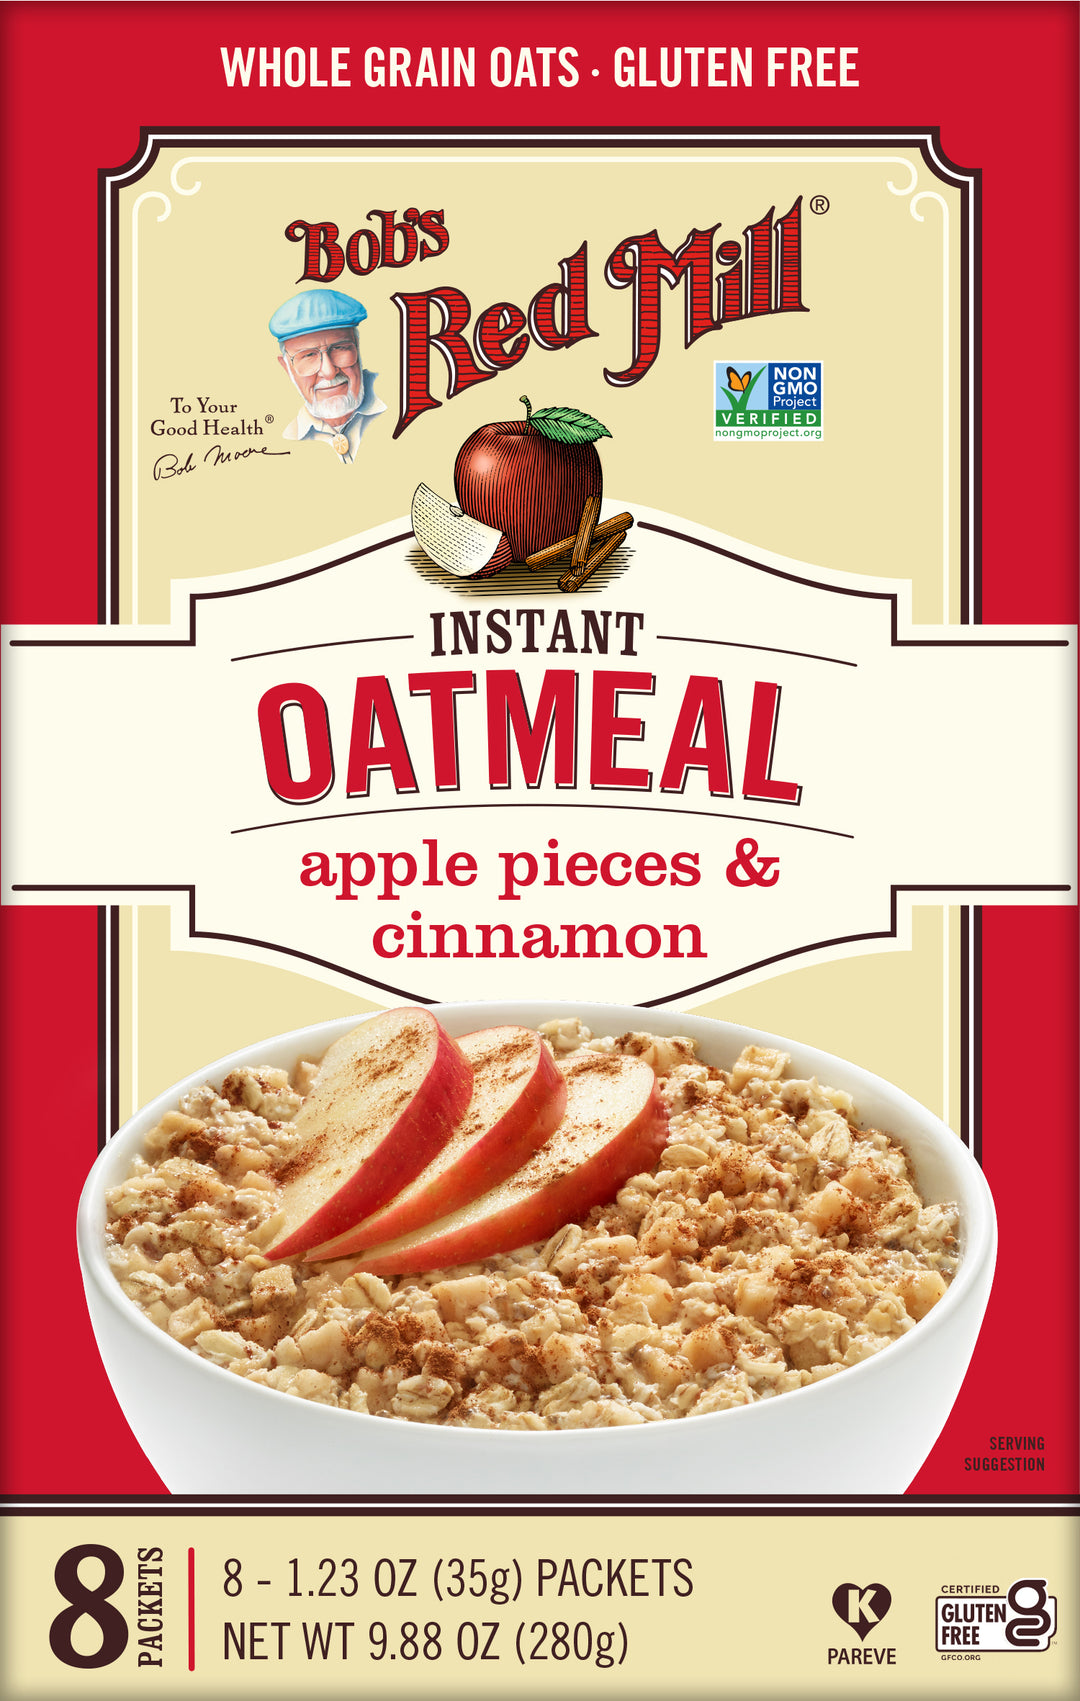 Bob's Red Mill Natural Foods Inc Apple Cinnamon Oatmeal Packets-9.88 oz.-4/Case